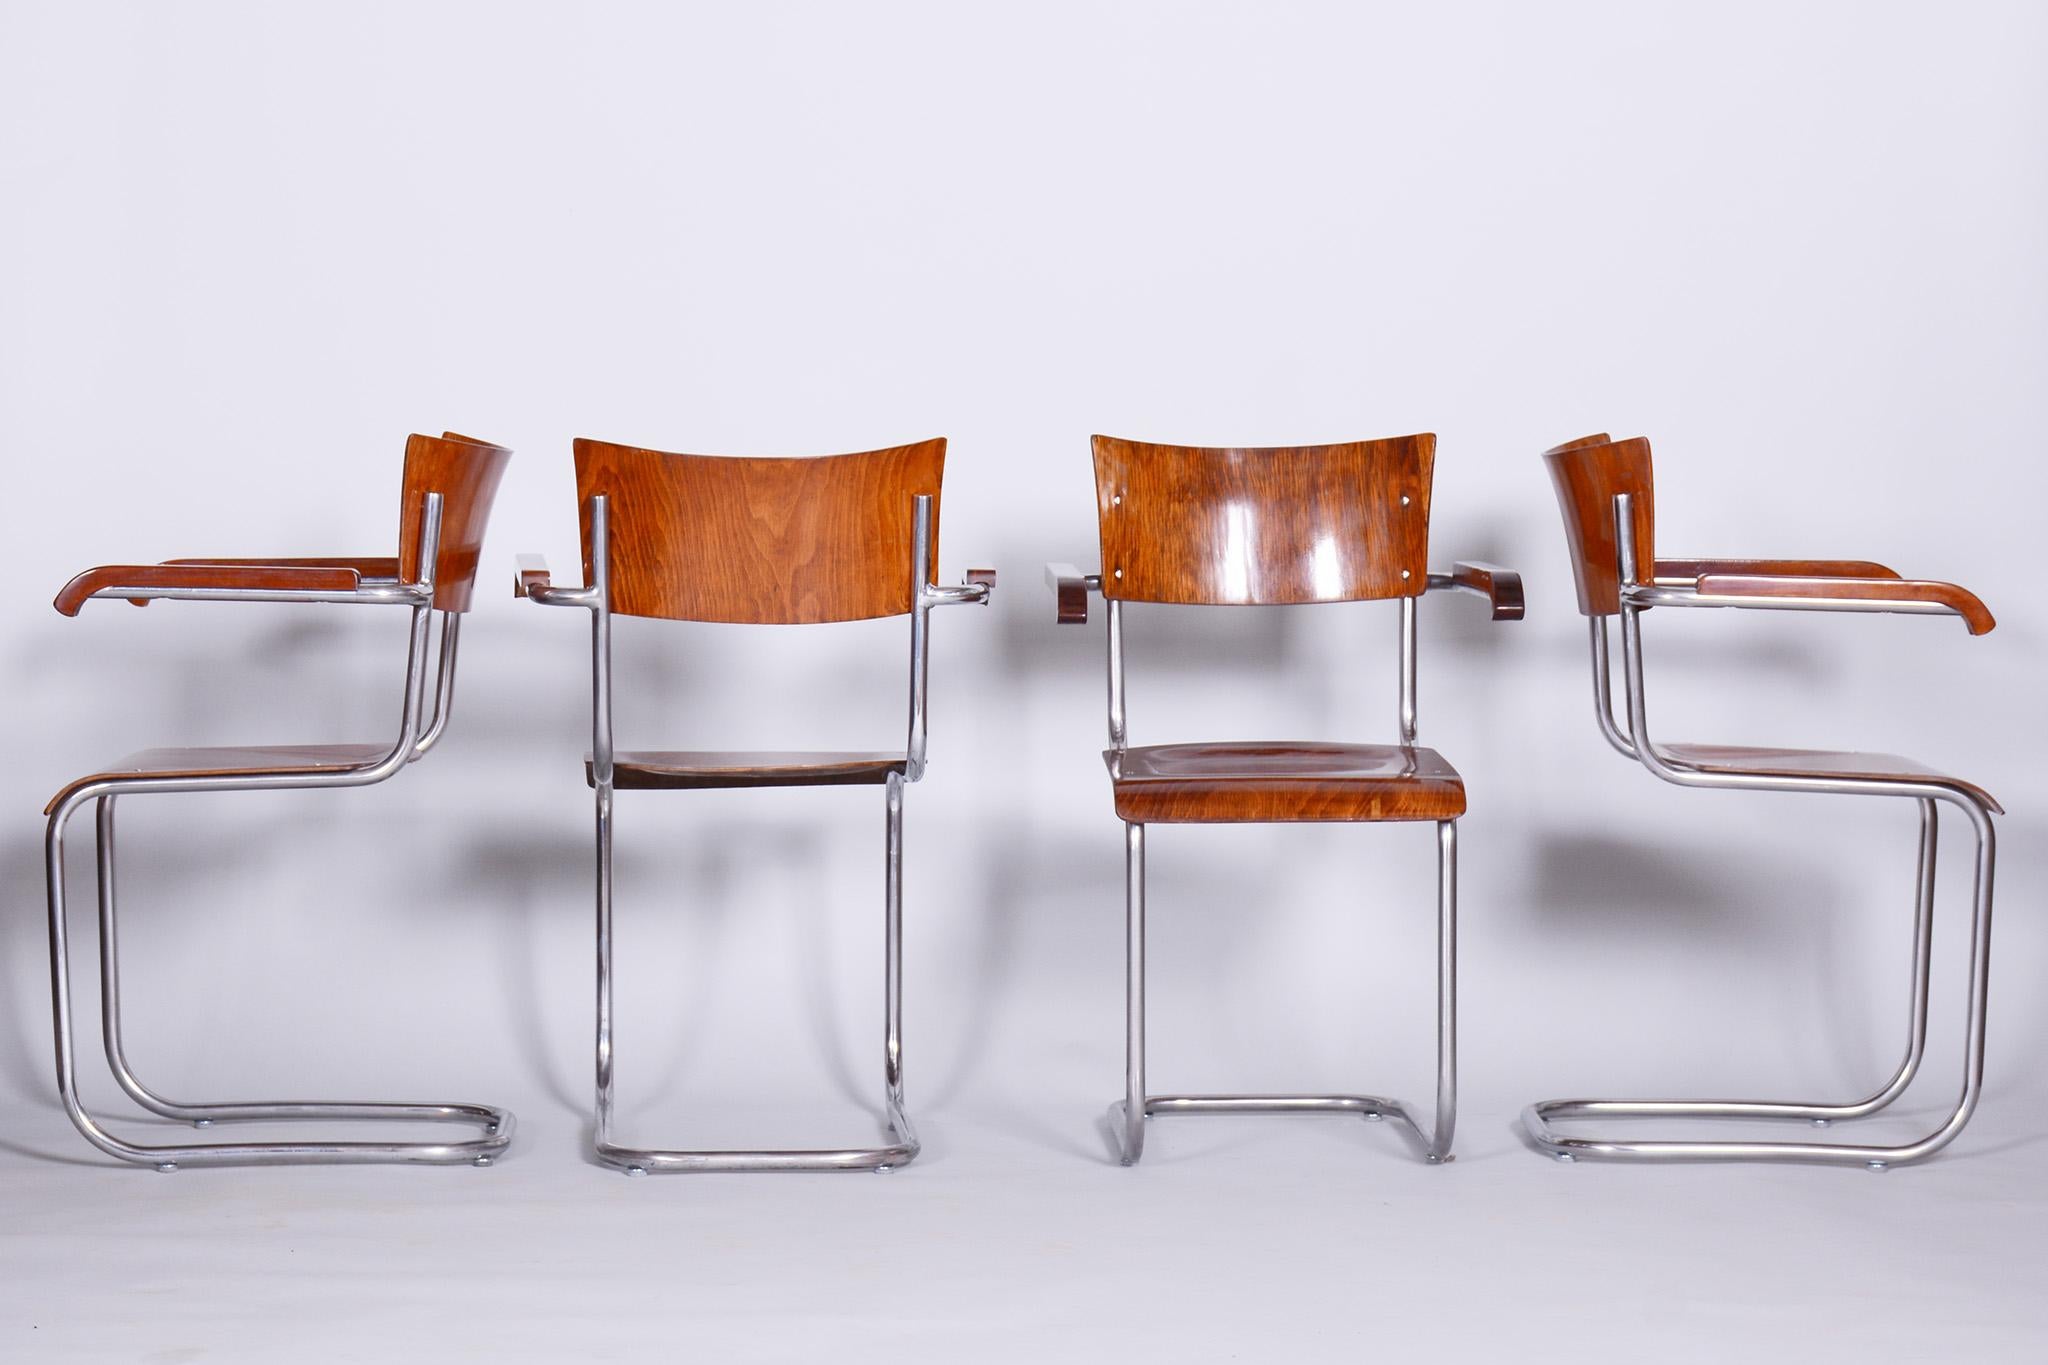 Set of 4 Restored Bauhaus Beech Armchairs Designed by Mart Stam, 1930s, Czechia In Good Condition For Sale In Horomerice, CZ